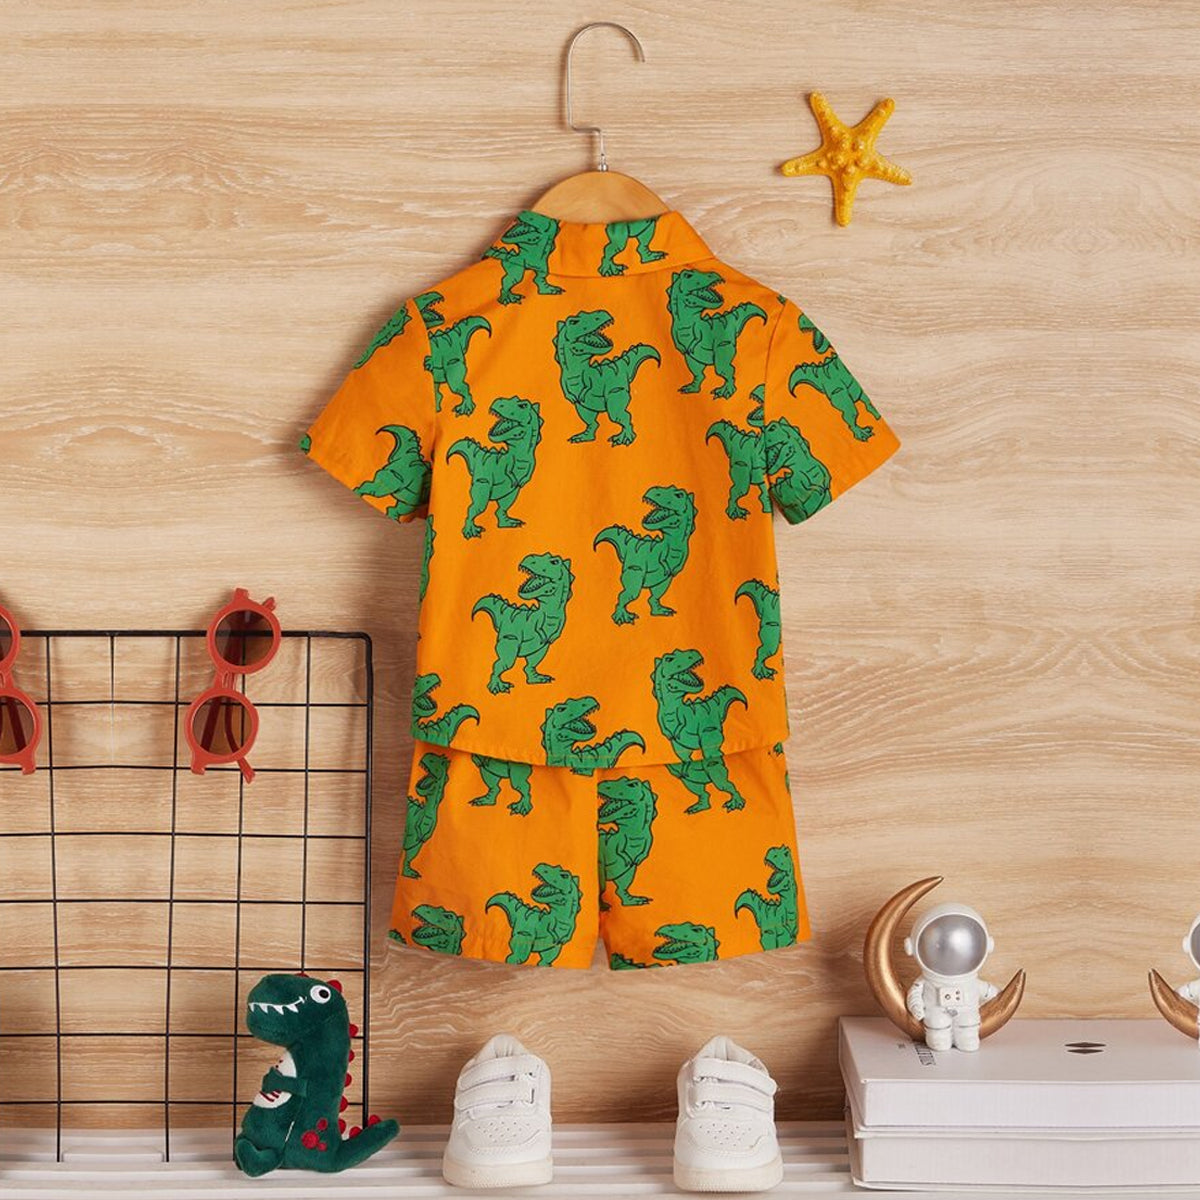 Venutaloza Baby Set Panda & Dinosaur-Apricot-Colored (Combo Pack Of 3) Casual Printed Shirt & Shorts Without tee Two Piece Set For Boy & Girls.